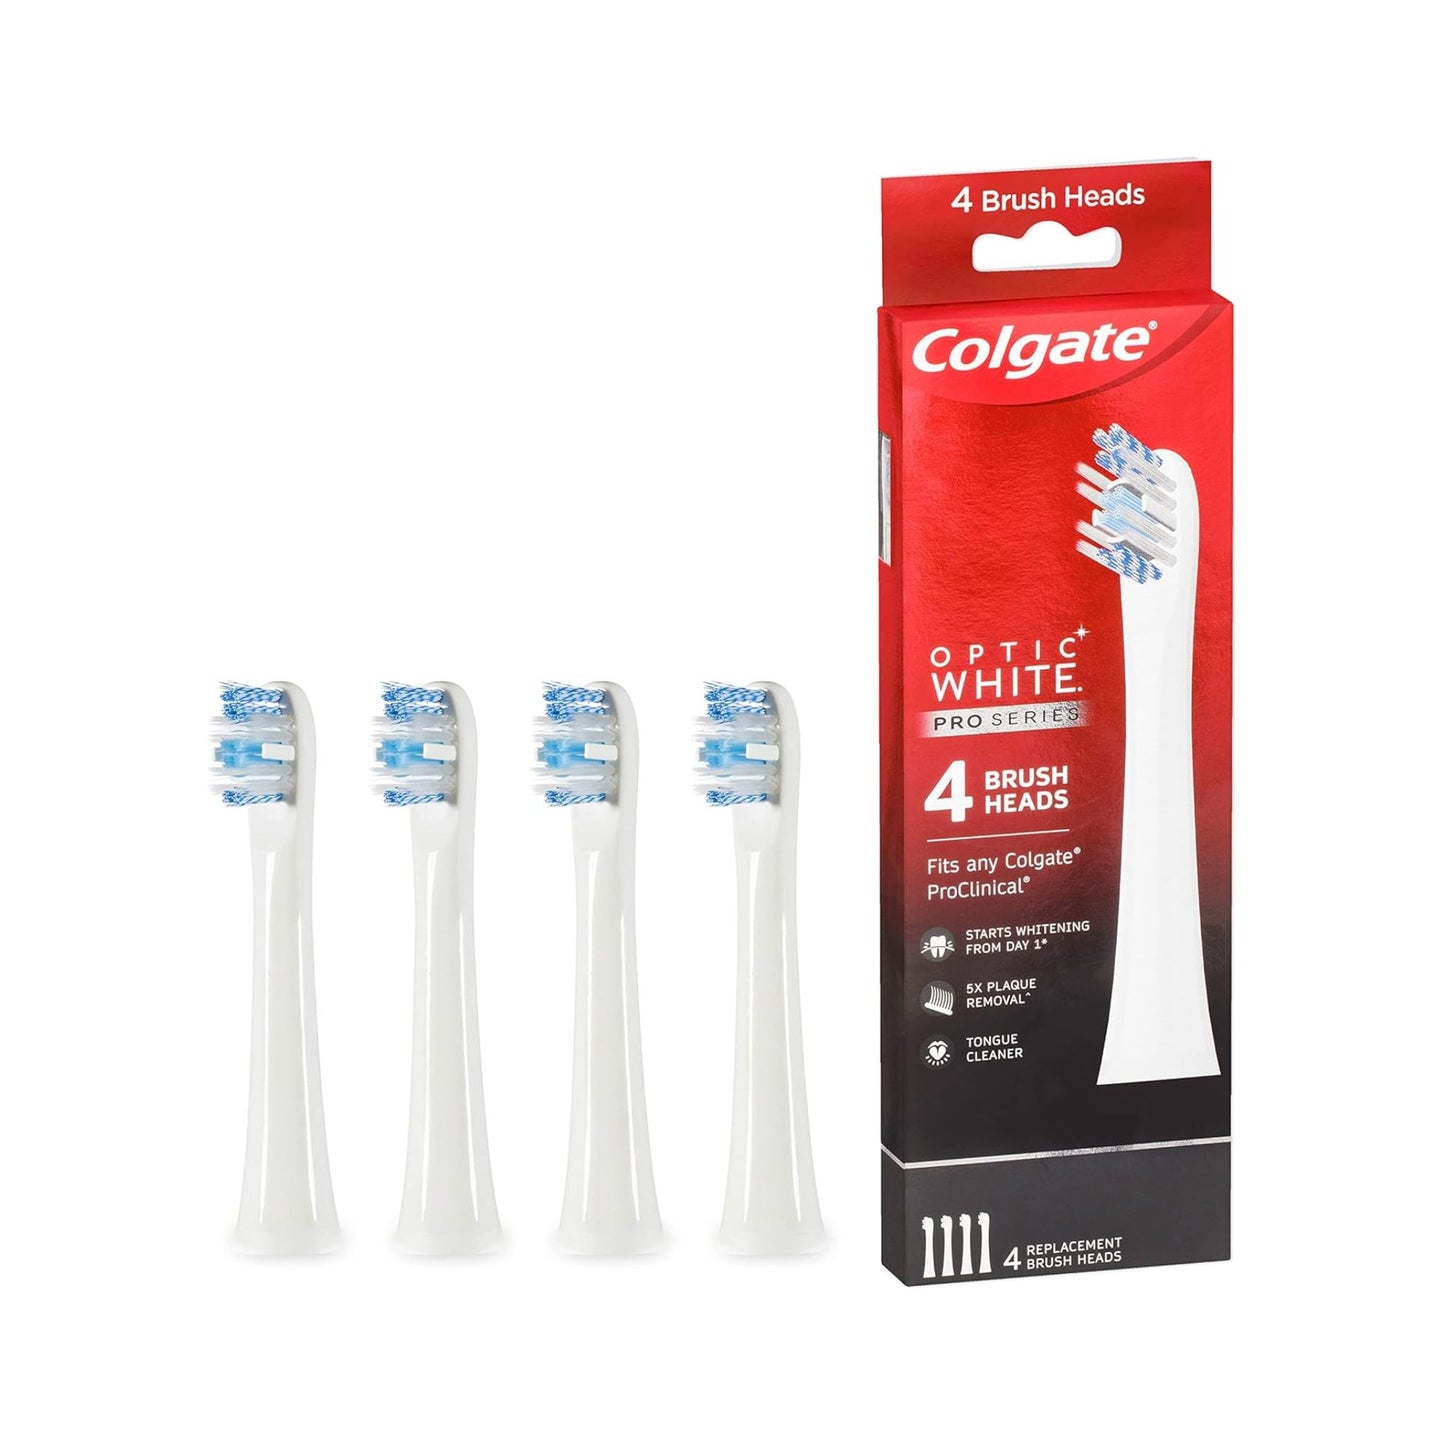 Colgate Optic White Pro Series Replaceable Brush Head, for Pro Clinical Electric Toothbrush, 4 Pack, Whitening, Soft Bristles